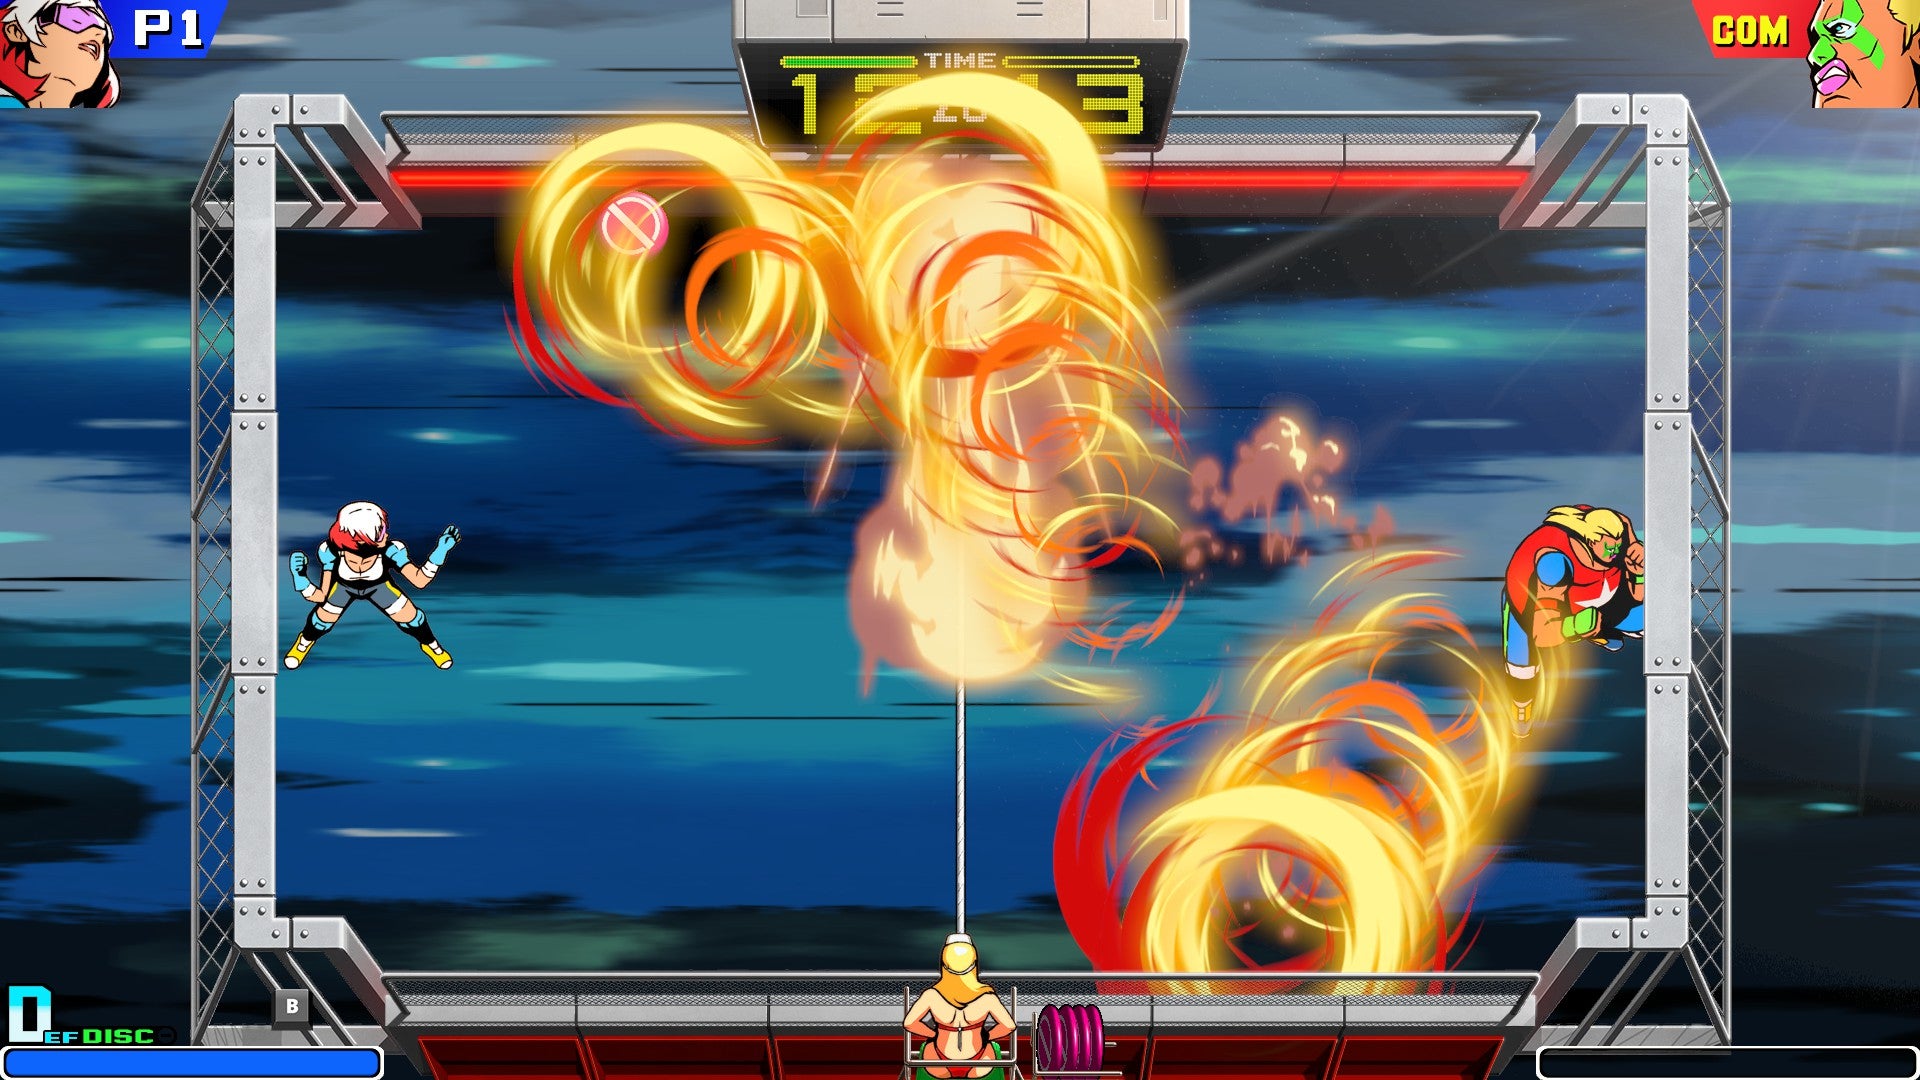 Two players in Windjammers 2 hurl flaming frisbees at each other across a small square